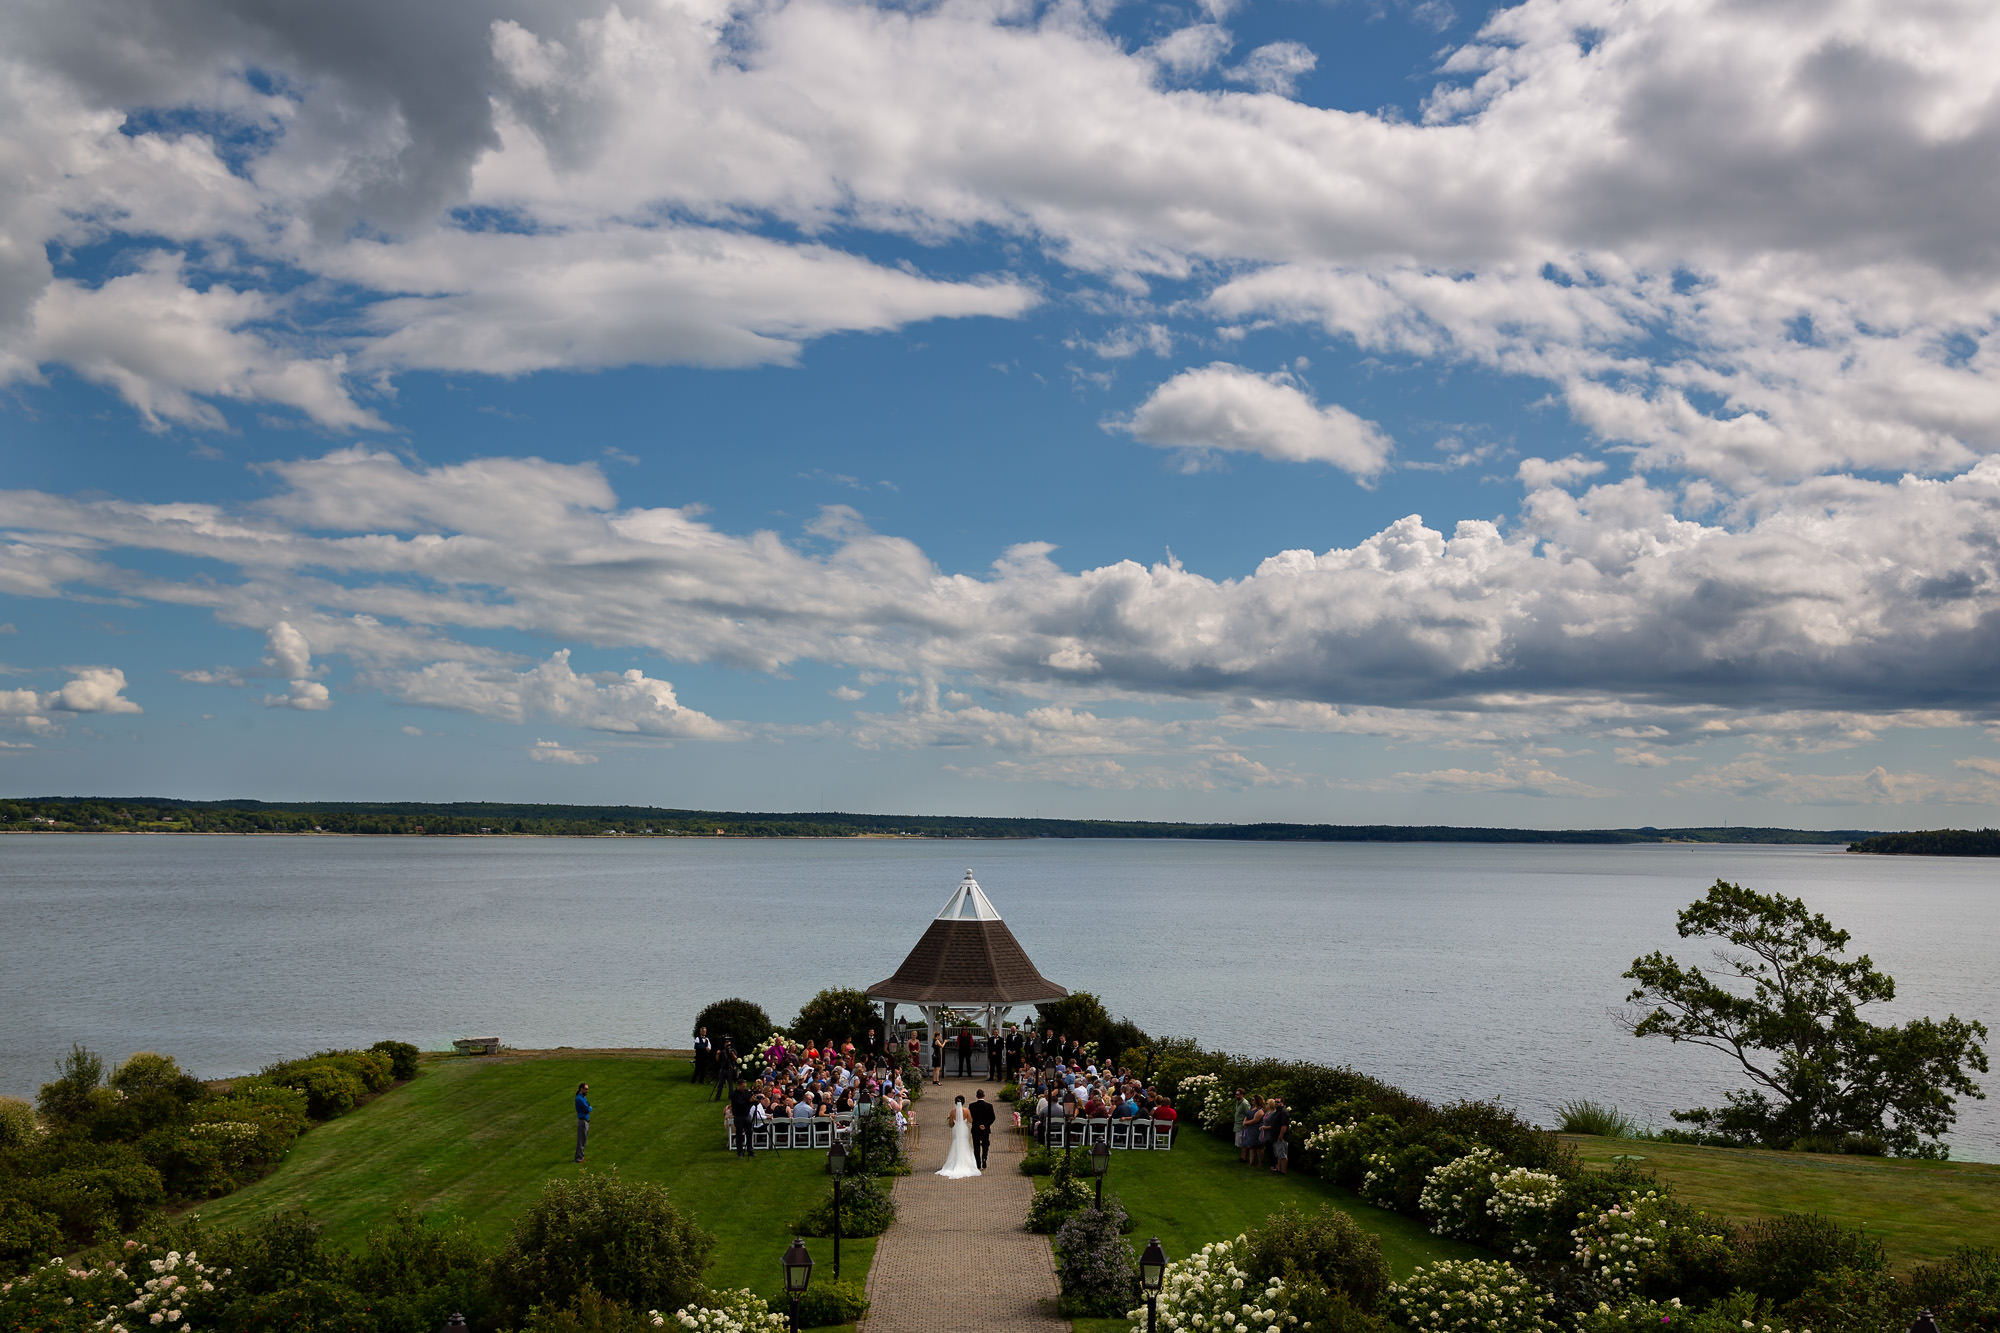 A beautiful wedding ceremony at French's Point in Stockton Springs, Maine